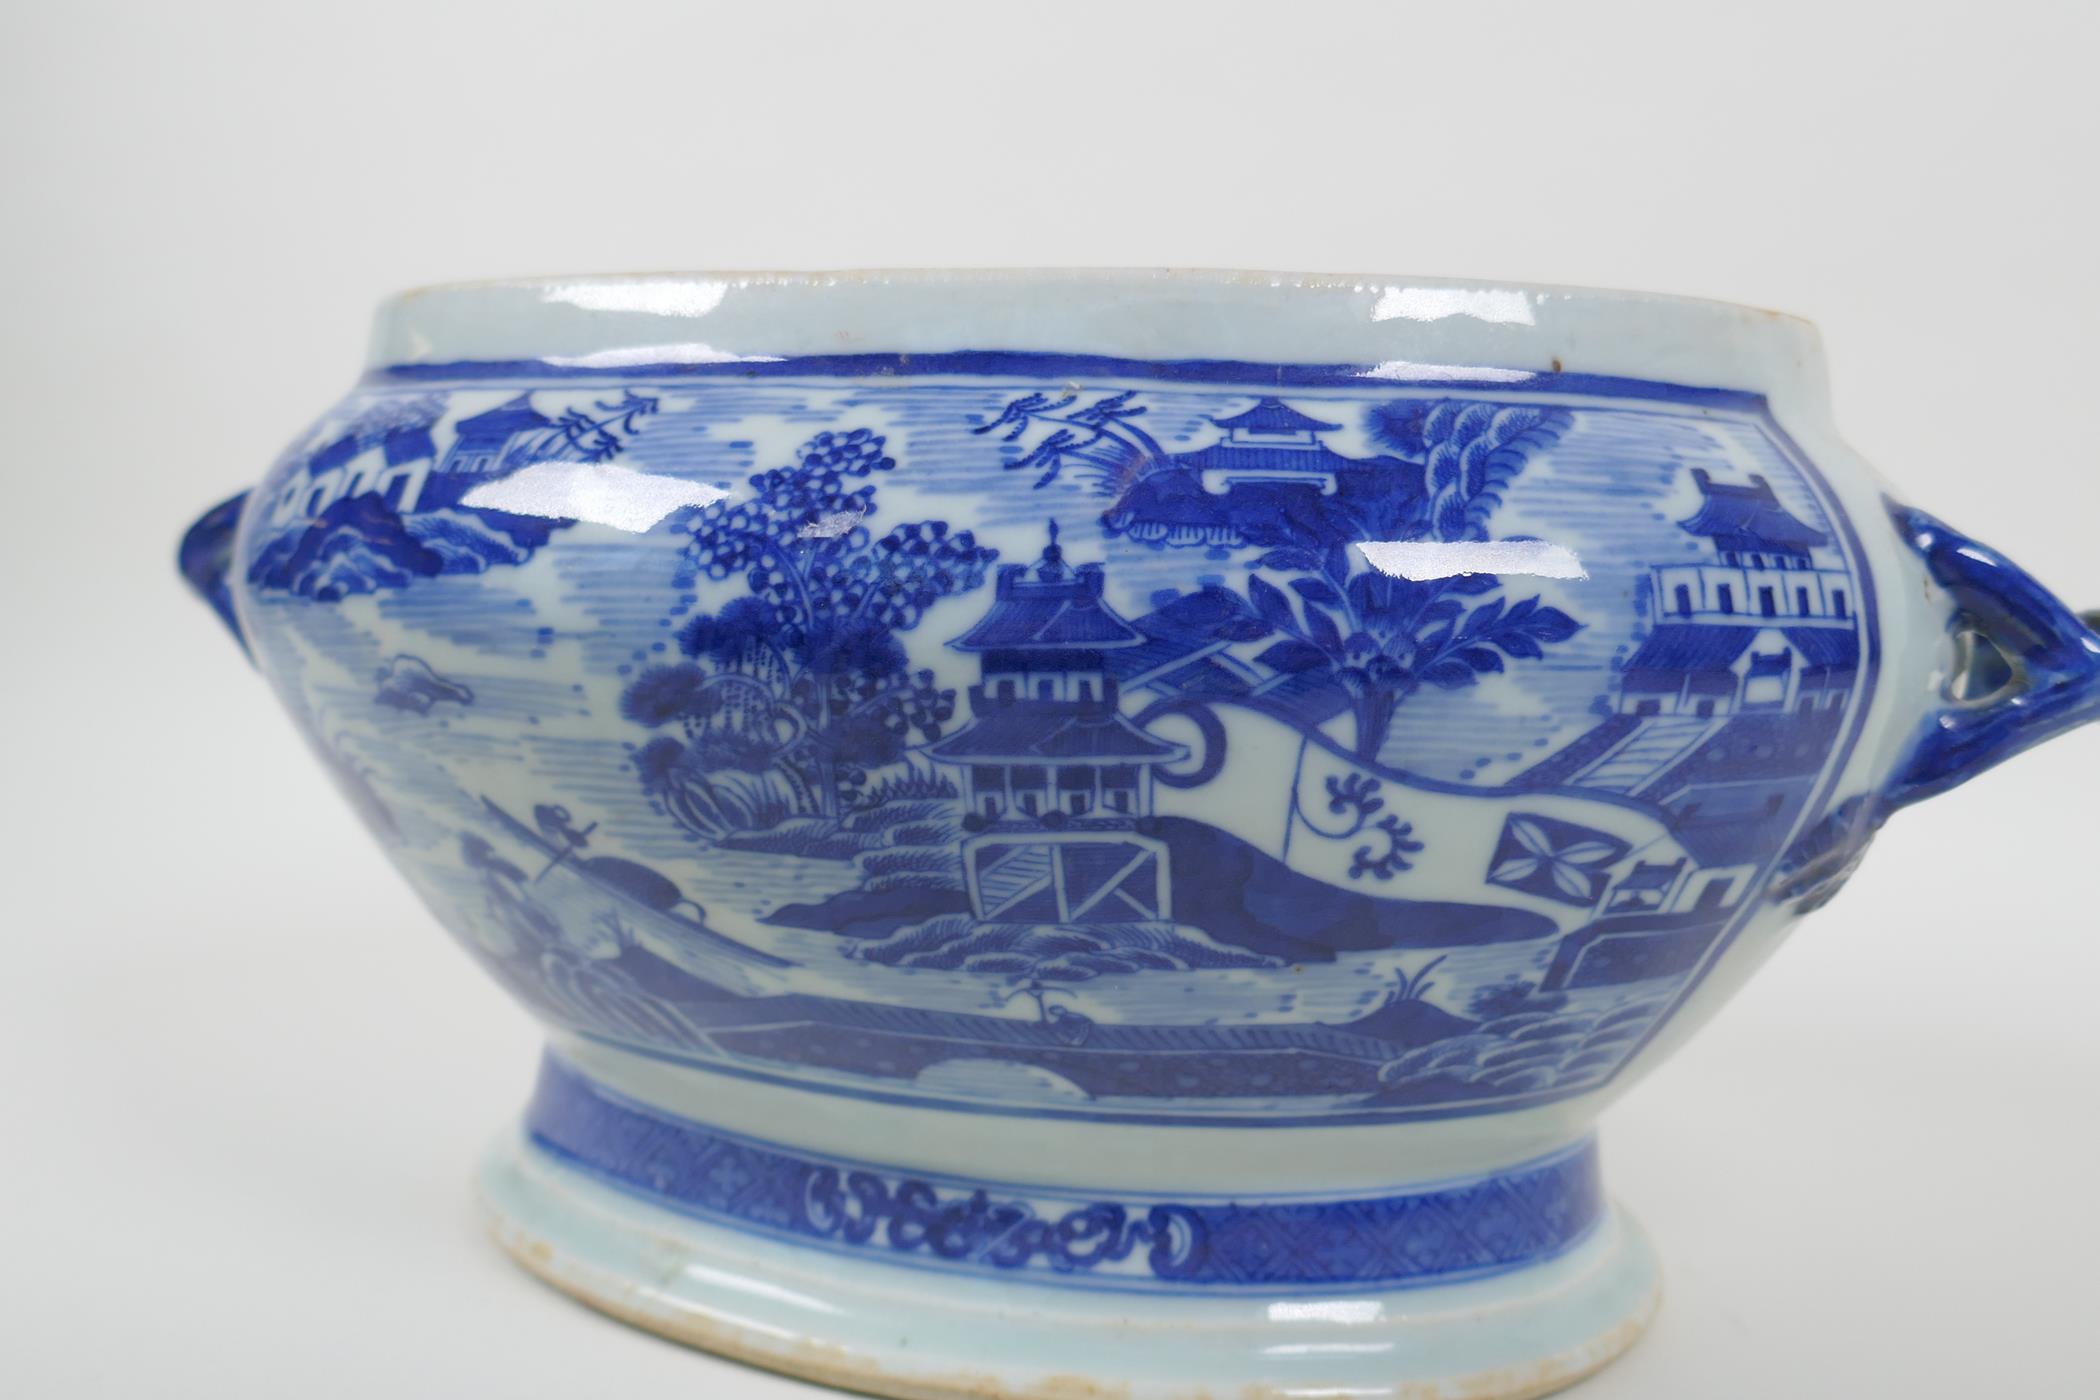 A C19th Chinese export blue and white porcelain two handled oval planter with decorative riverside - Image 3 of 5